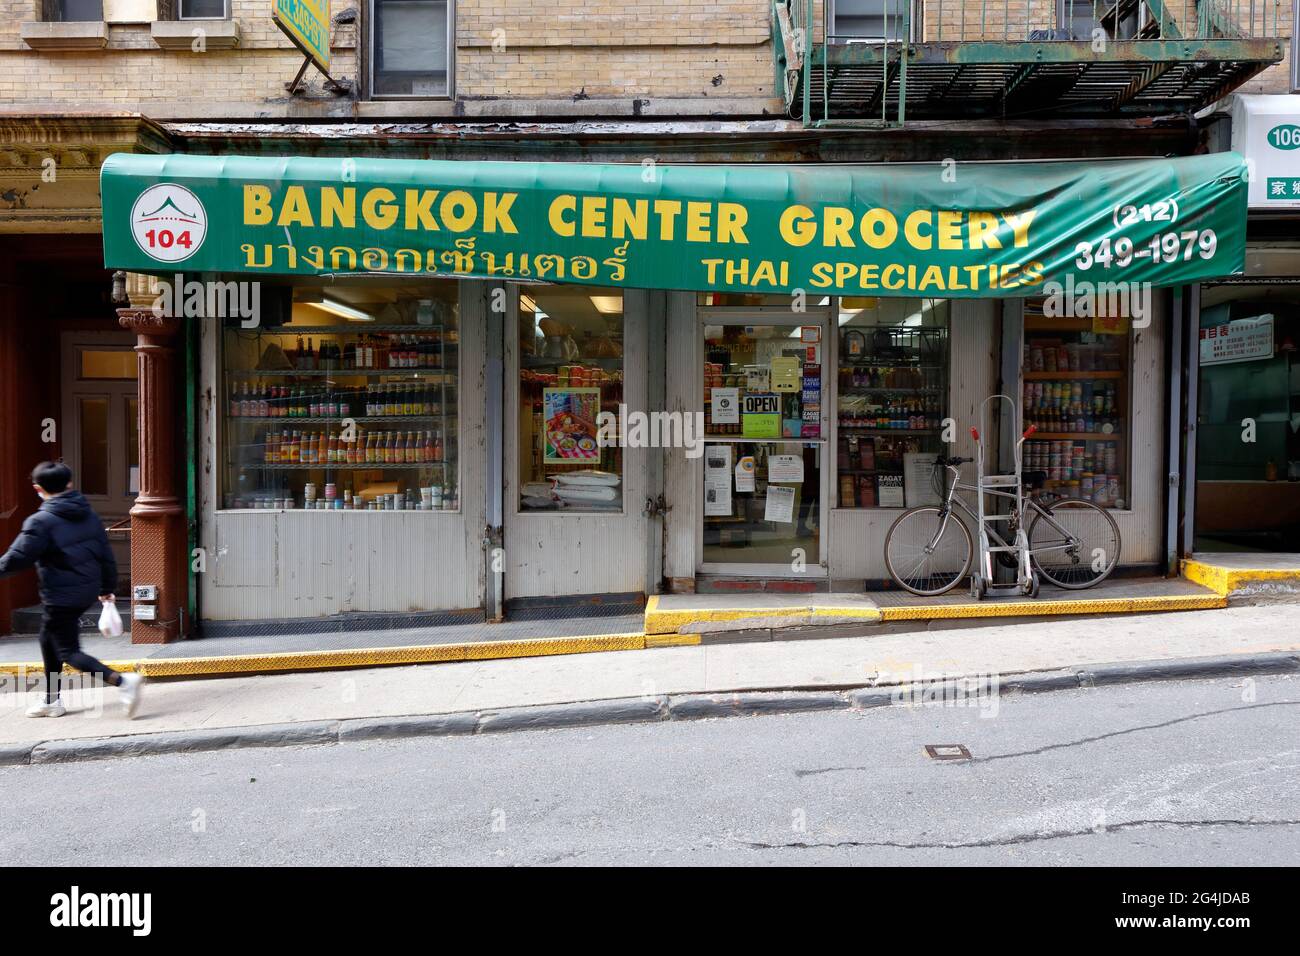 Bangkok Center Grocery, 104 Mosco St, New York, NYC storefront photo of Thai grocer in Manhattan Chinatown. Stock Photo